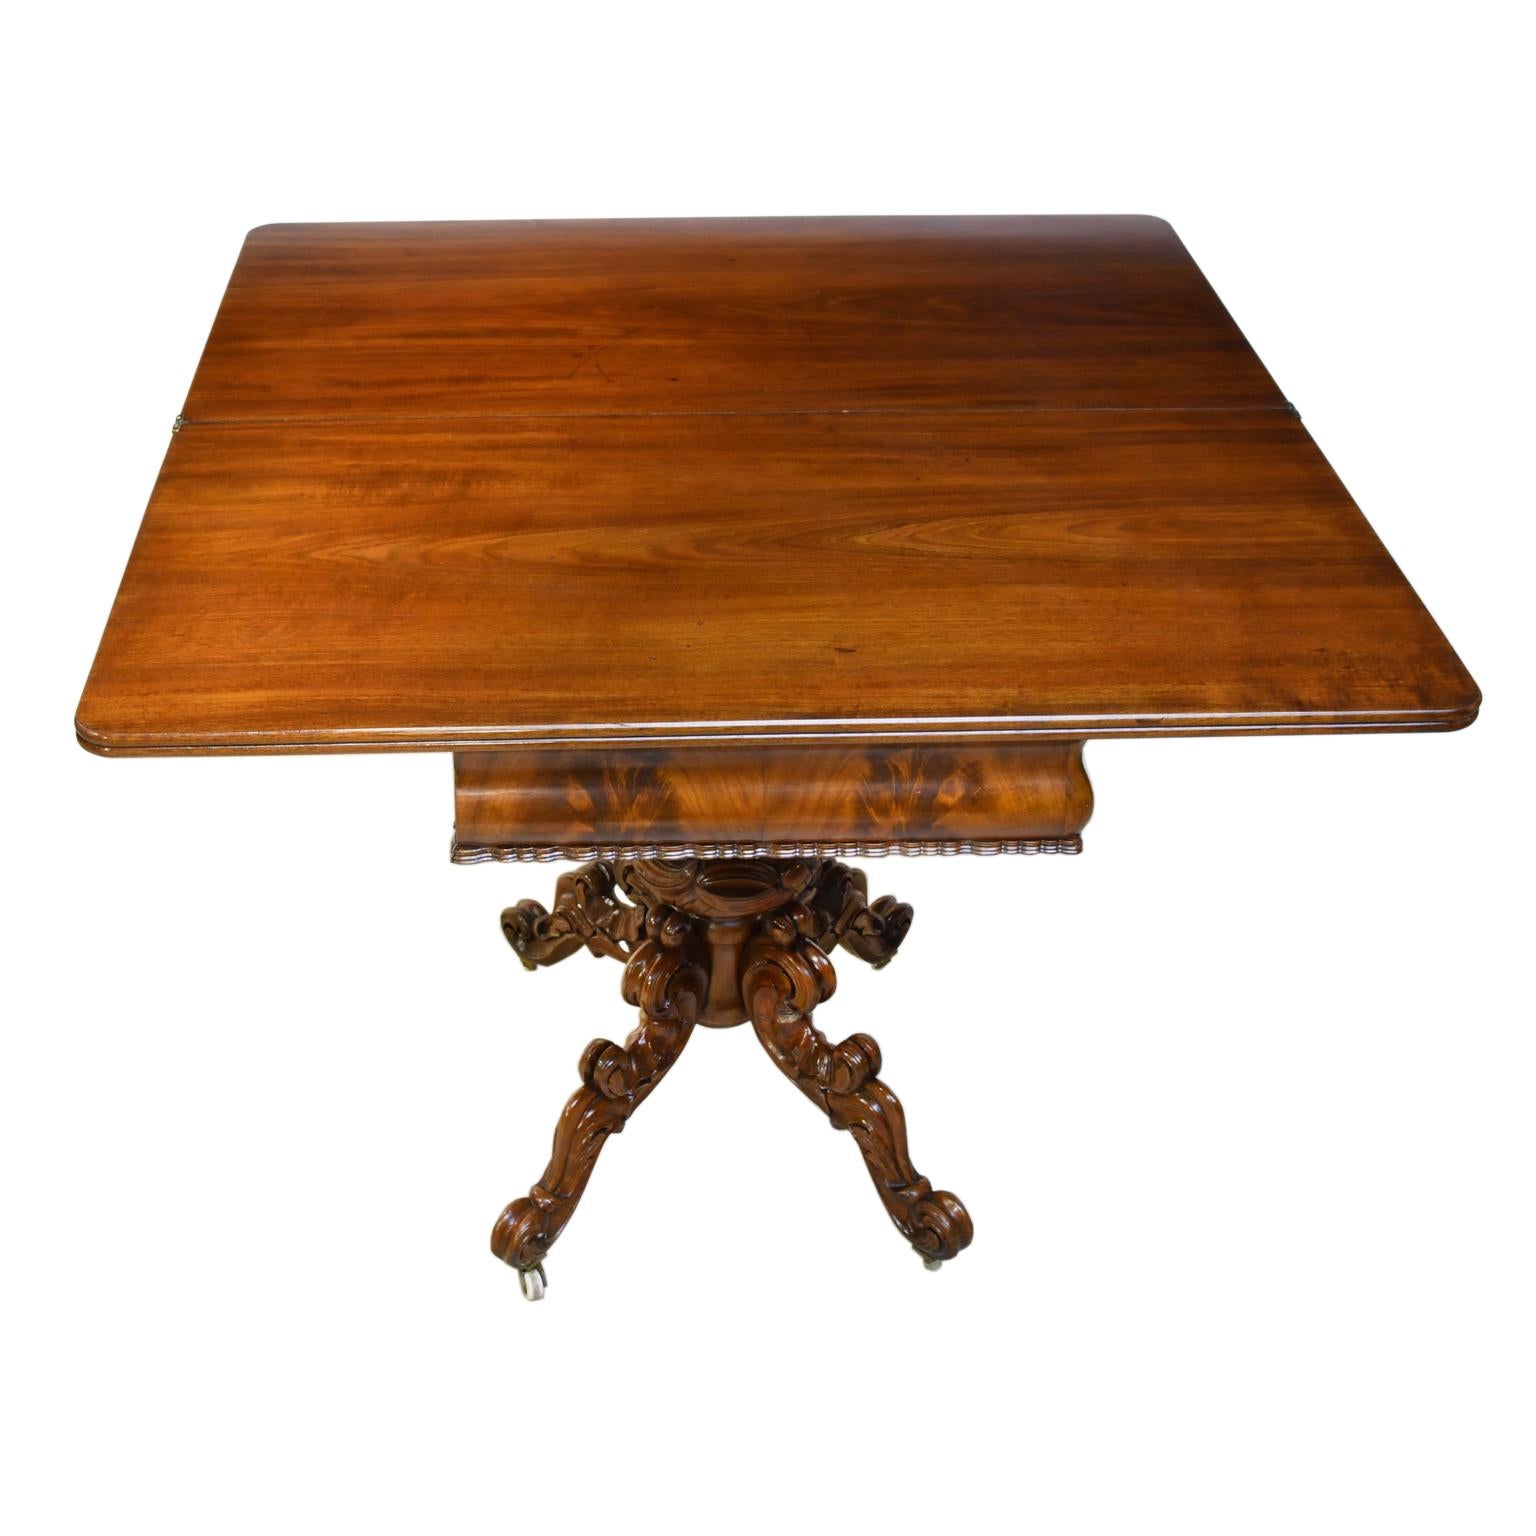 Carved Scandinavian Rococo Revival Game Table, circa 1850 For Sale